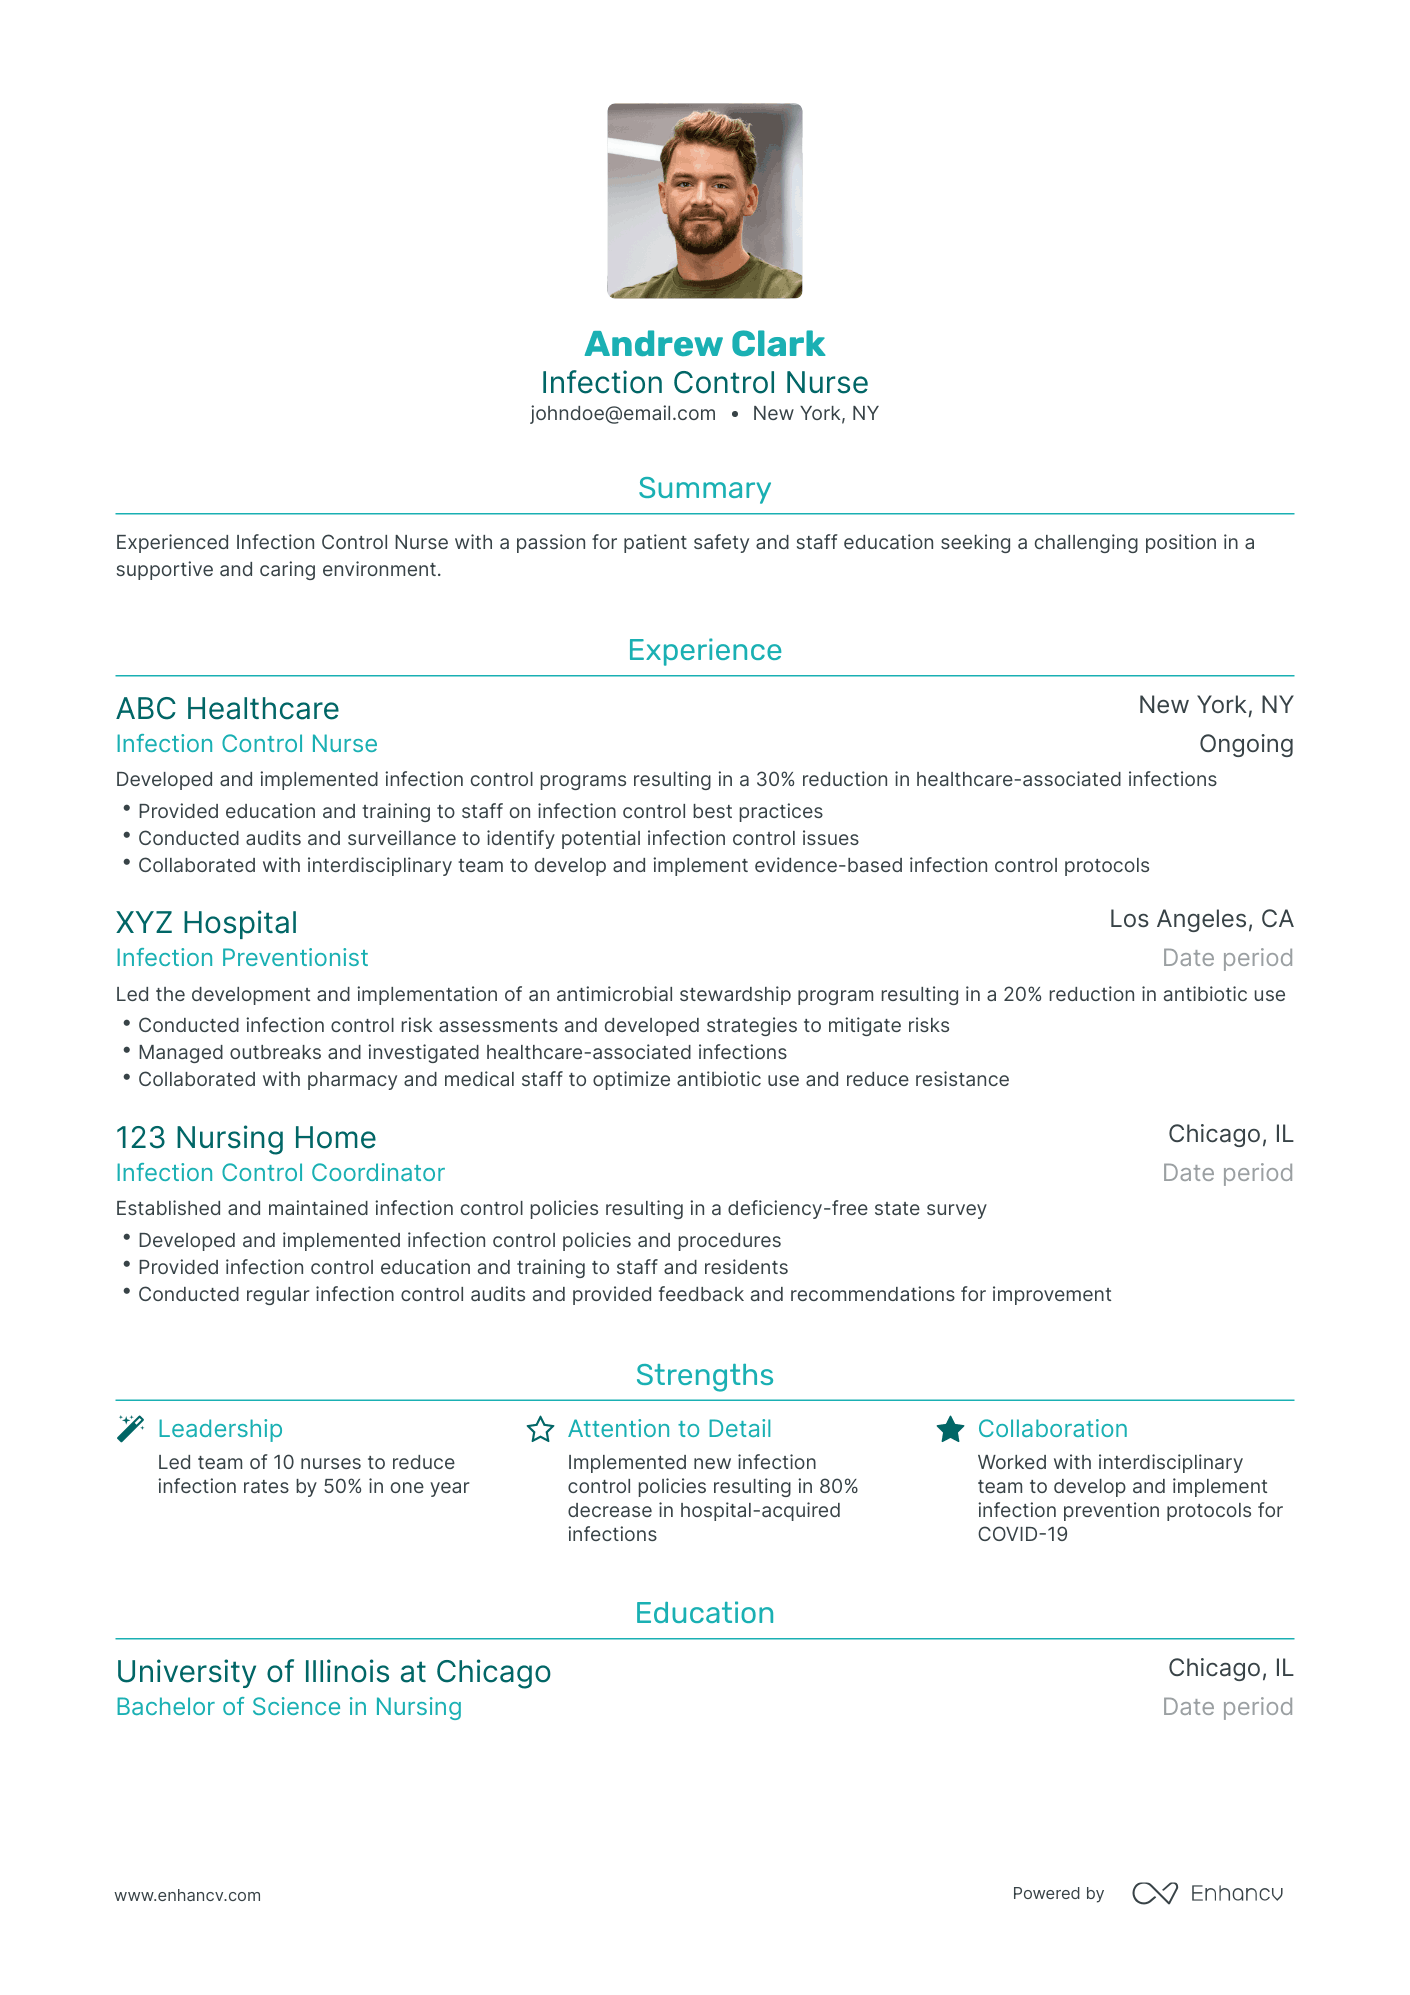 Traditional Infection Control Nurse Resume Template